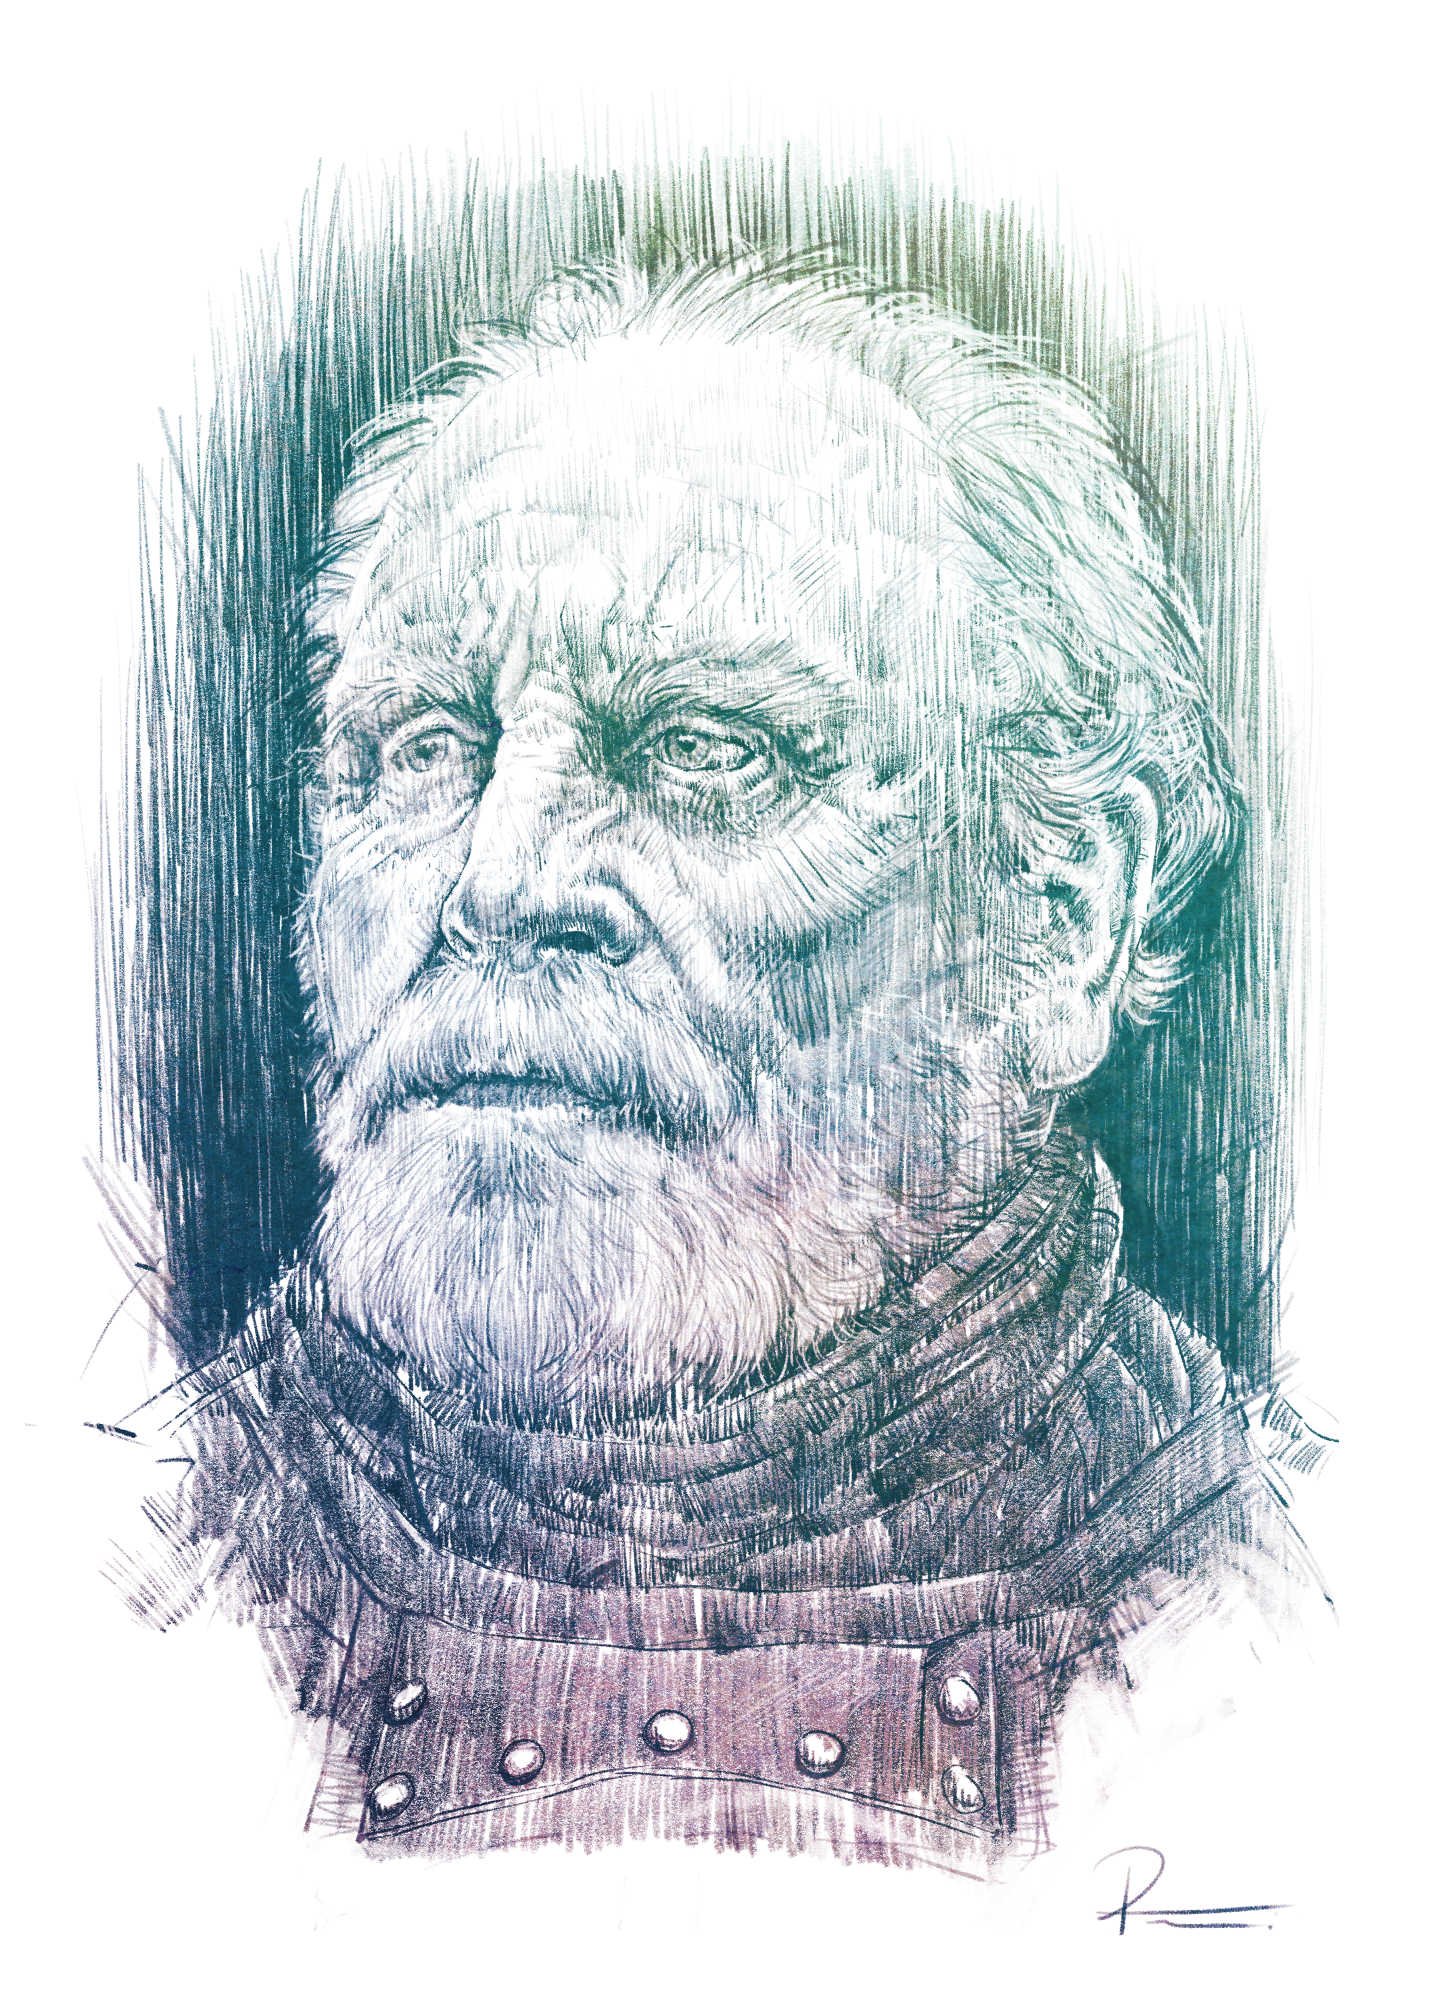 James Cosmo - Jeor Mormont, the "Old Bear" in Game of Thrones